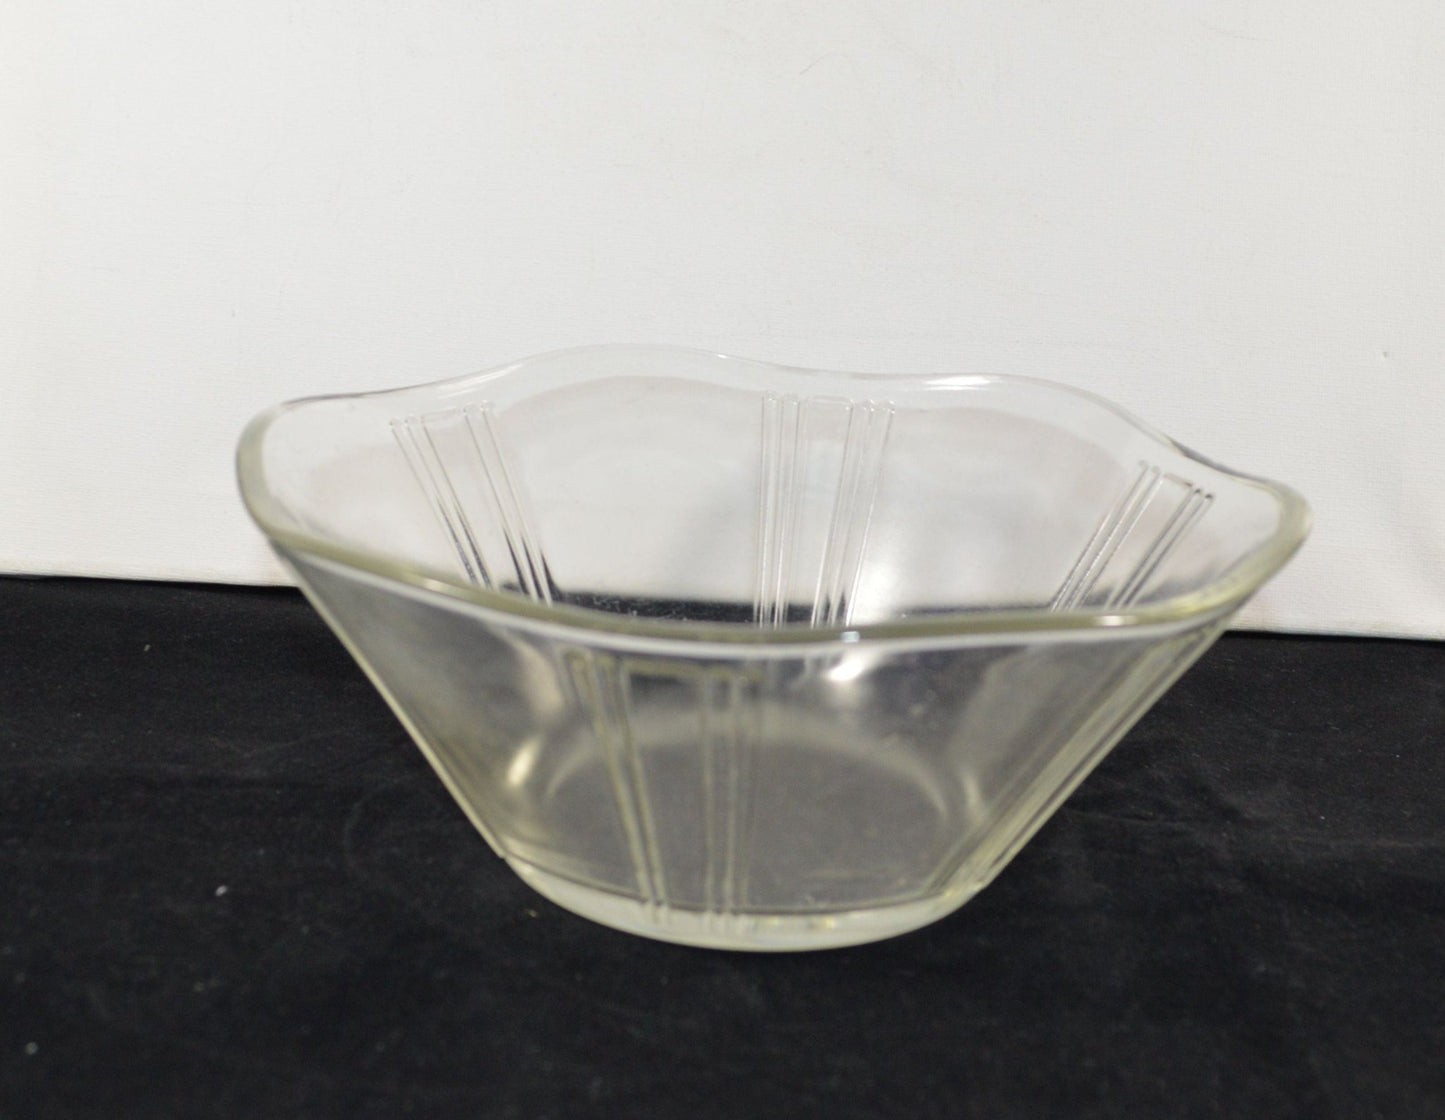 TABLEWARE TWO GLASS FRUIT BOWLS(PREVIOUSLY OWNED) GOOD CONDITION - TMD167207